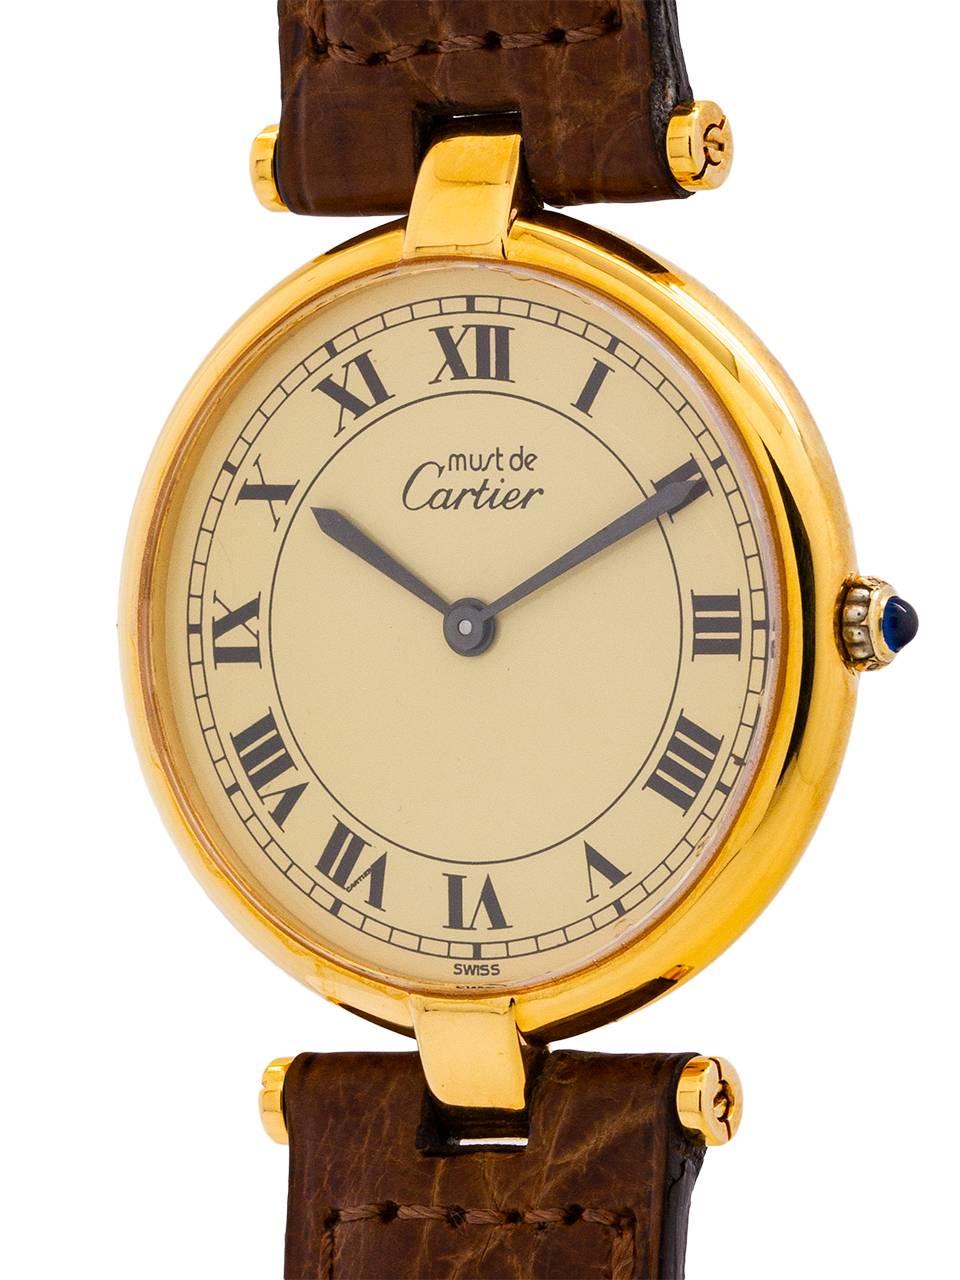 
Cartier man’s vermeil Vendome Tank wristwatch circa 1990s. Case measuring 30 x 37mm with T-bar lugs. Featuring an original cream dial with classic printed Cartier Roman numbers with blued steel hands and blue sapphire cabochon crown. Battery